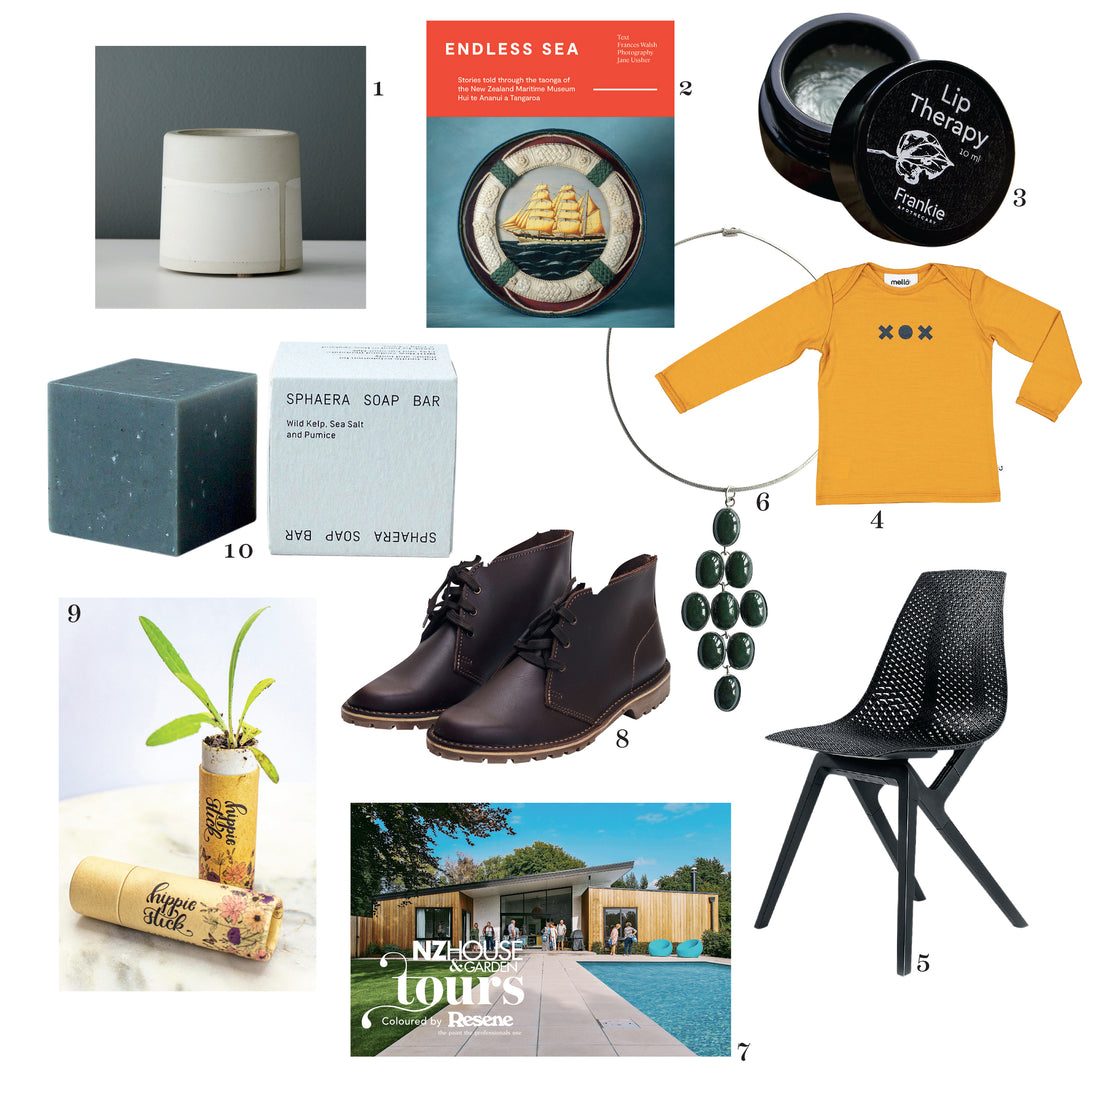 NZ House & Garden's Christmas gift guide: Presents made locally